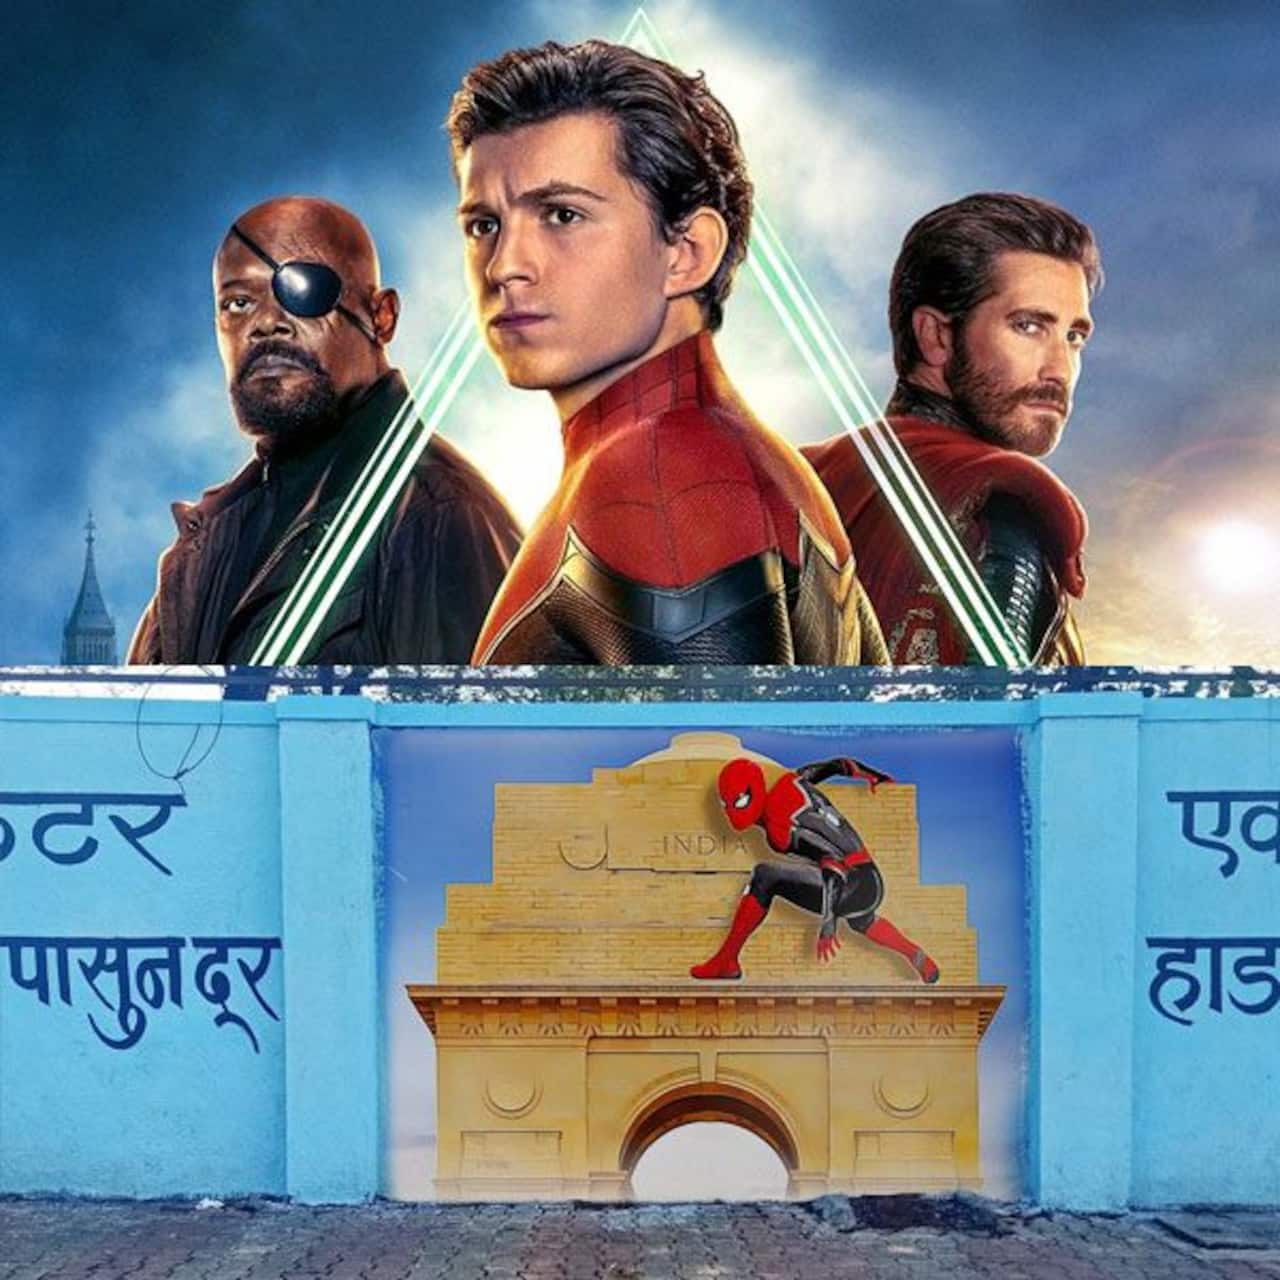 Spider-Man fans in India give a special graffiti tribute to the superhero - view pics